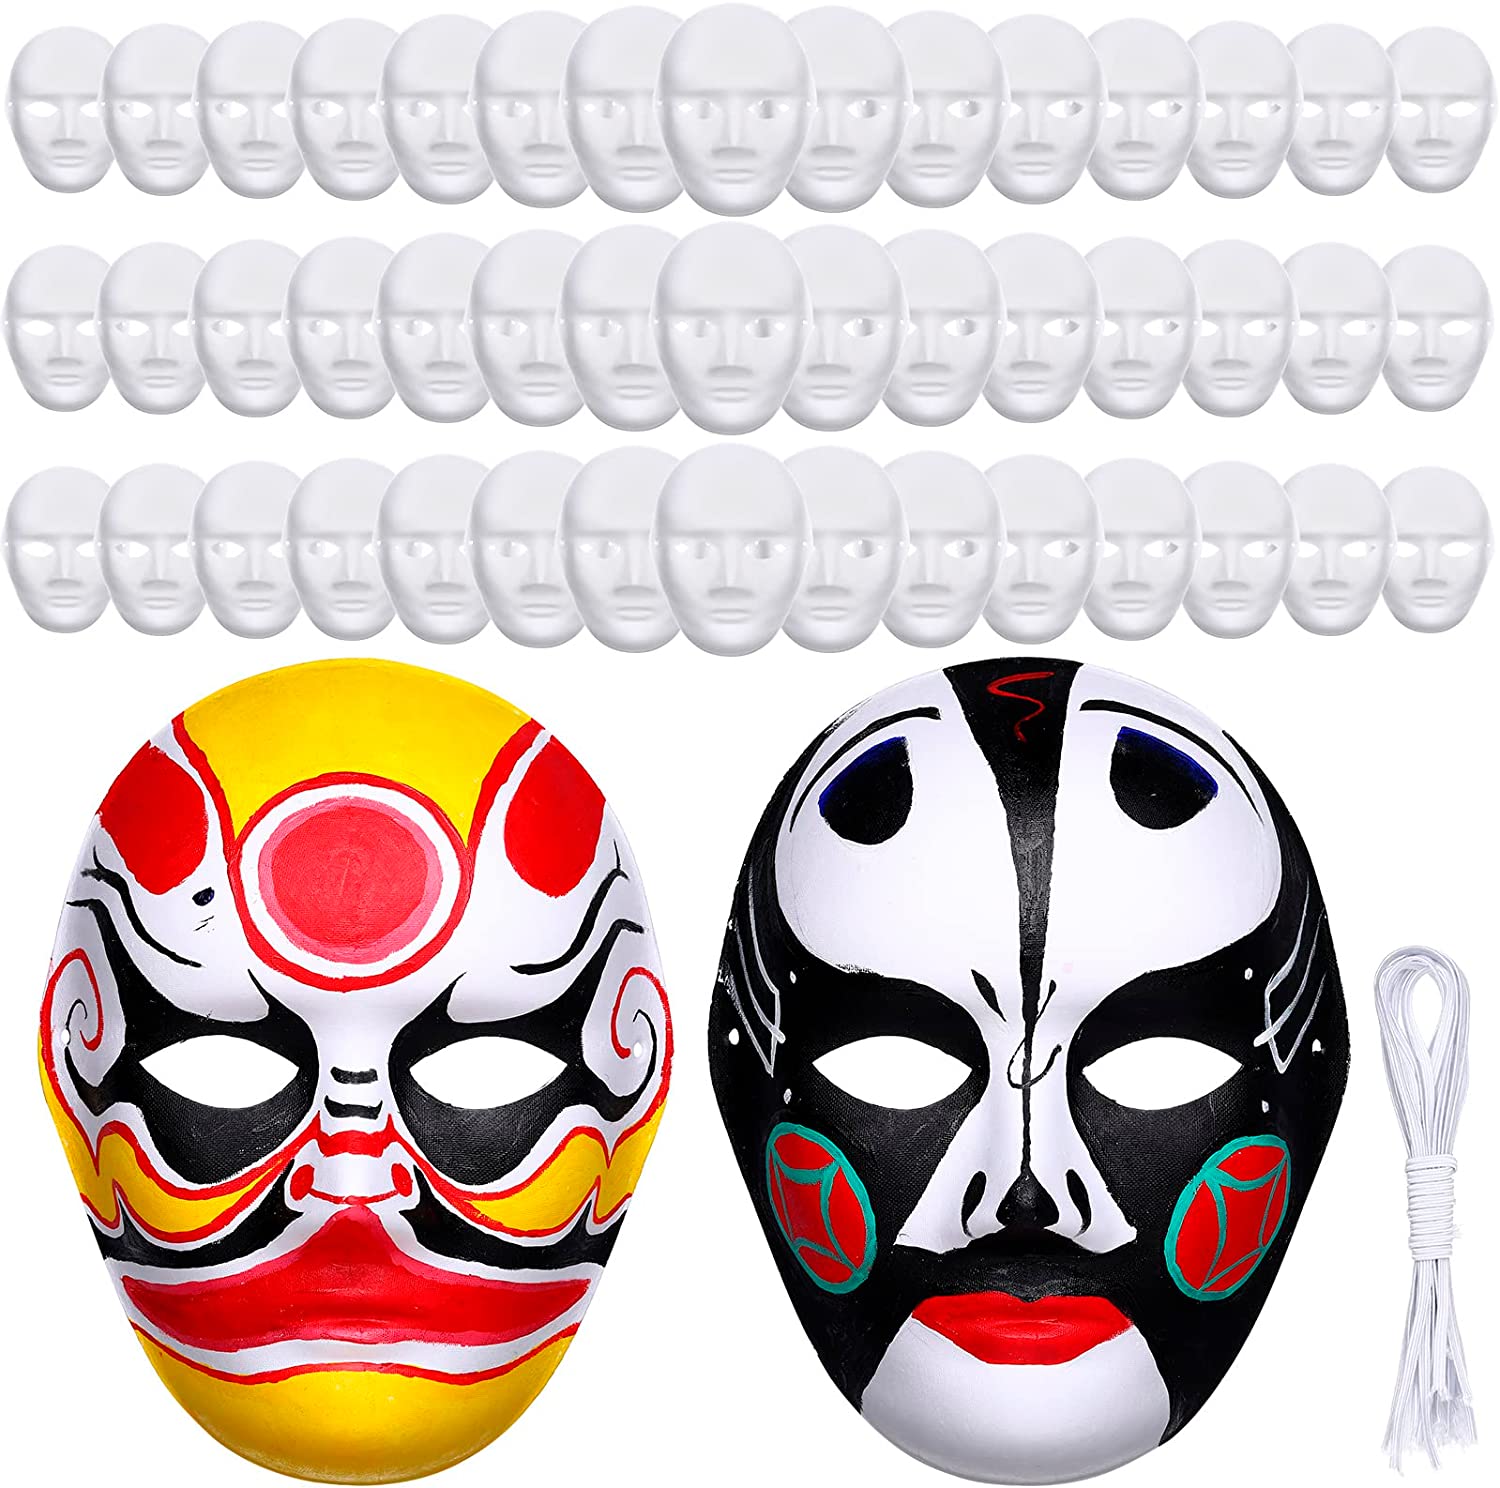 Heatoe 10 Packs White Paper Masks(Men and Women) with 10 Pcs Tied Ropes, Blank Full Face Mask, Paintable Paper Mask, Cosplay Masquerade Mask for